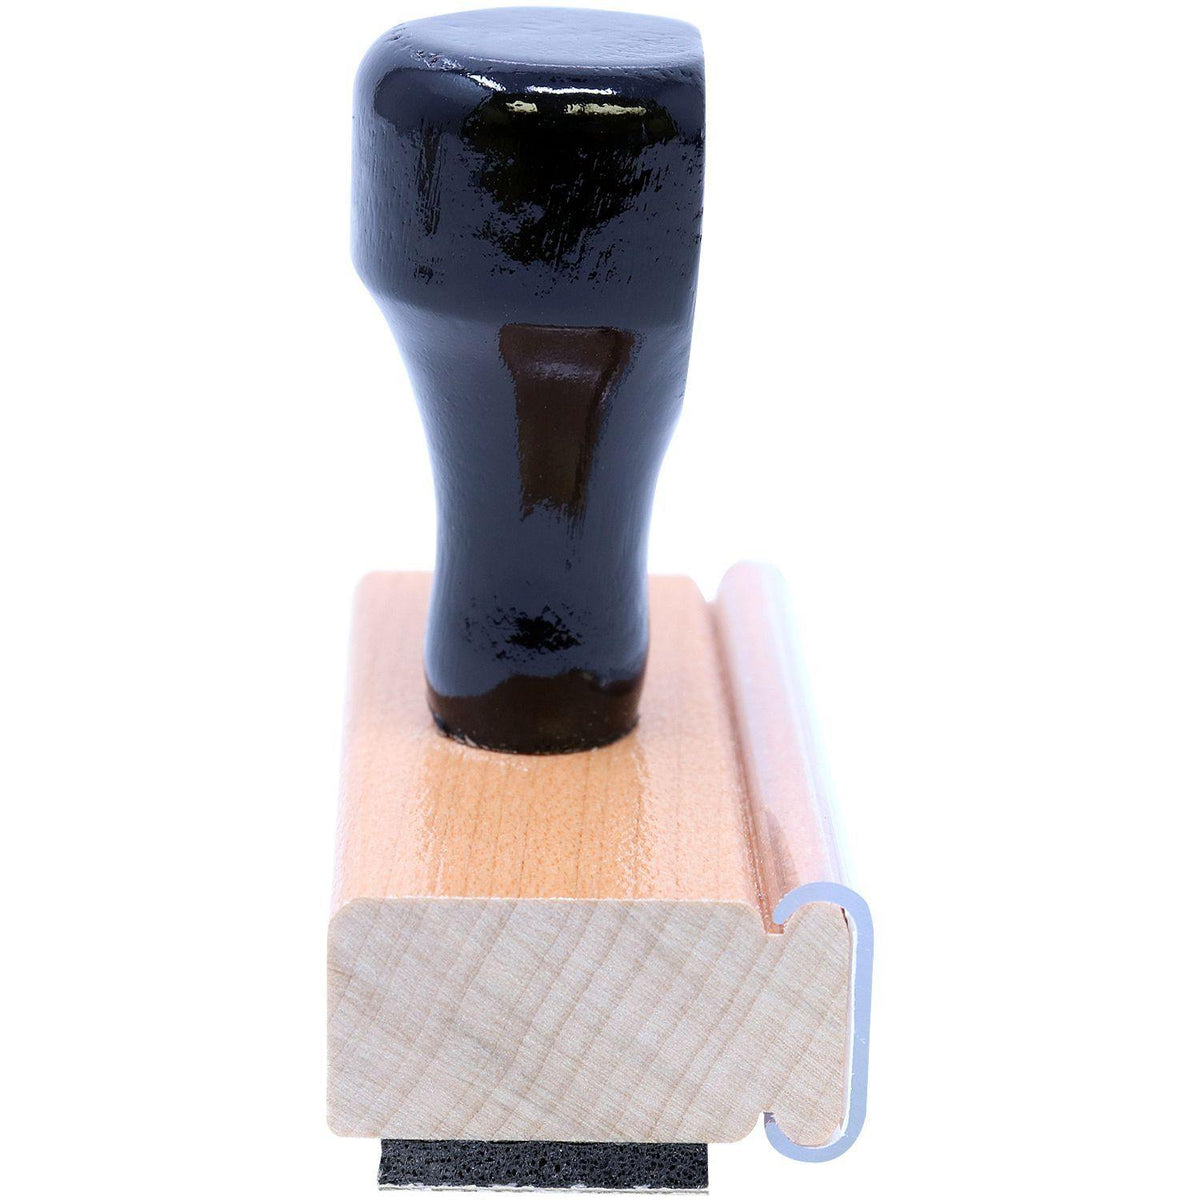 Original Rubber Stamp - Engineer Seal Stamps - Brand_Acorn, Impression Size_Small, Stamp Type_Regular Stamp, Type of Use_Office